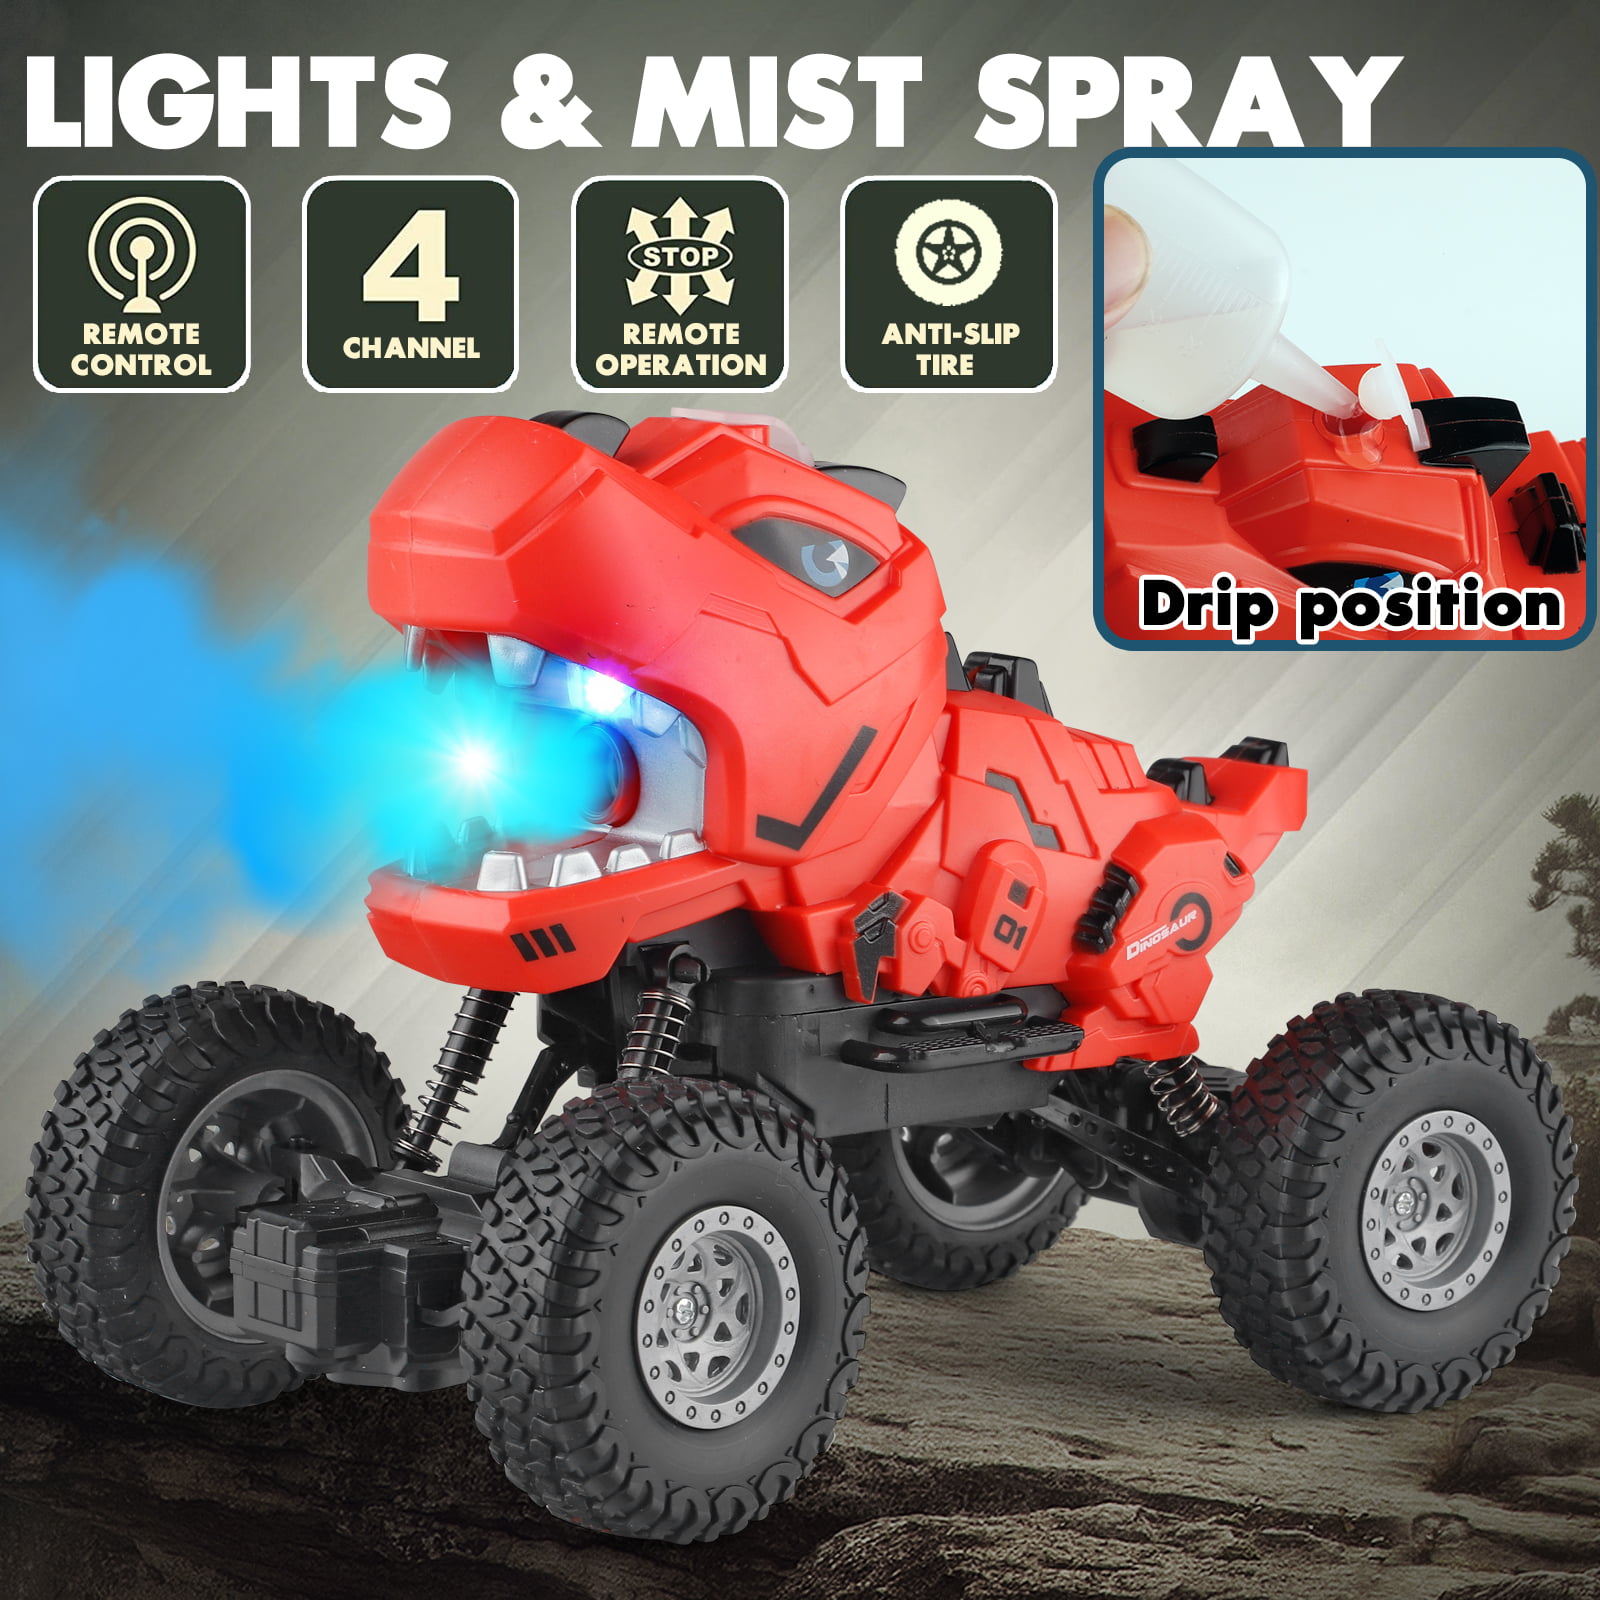 Family Smiles Kids RC Dinosaur Monster Truck Toy Water Spray Haze Lights Sound Effects Remote Control Vehicle 1:16 Scale Gift Toys for Boys Teal